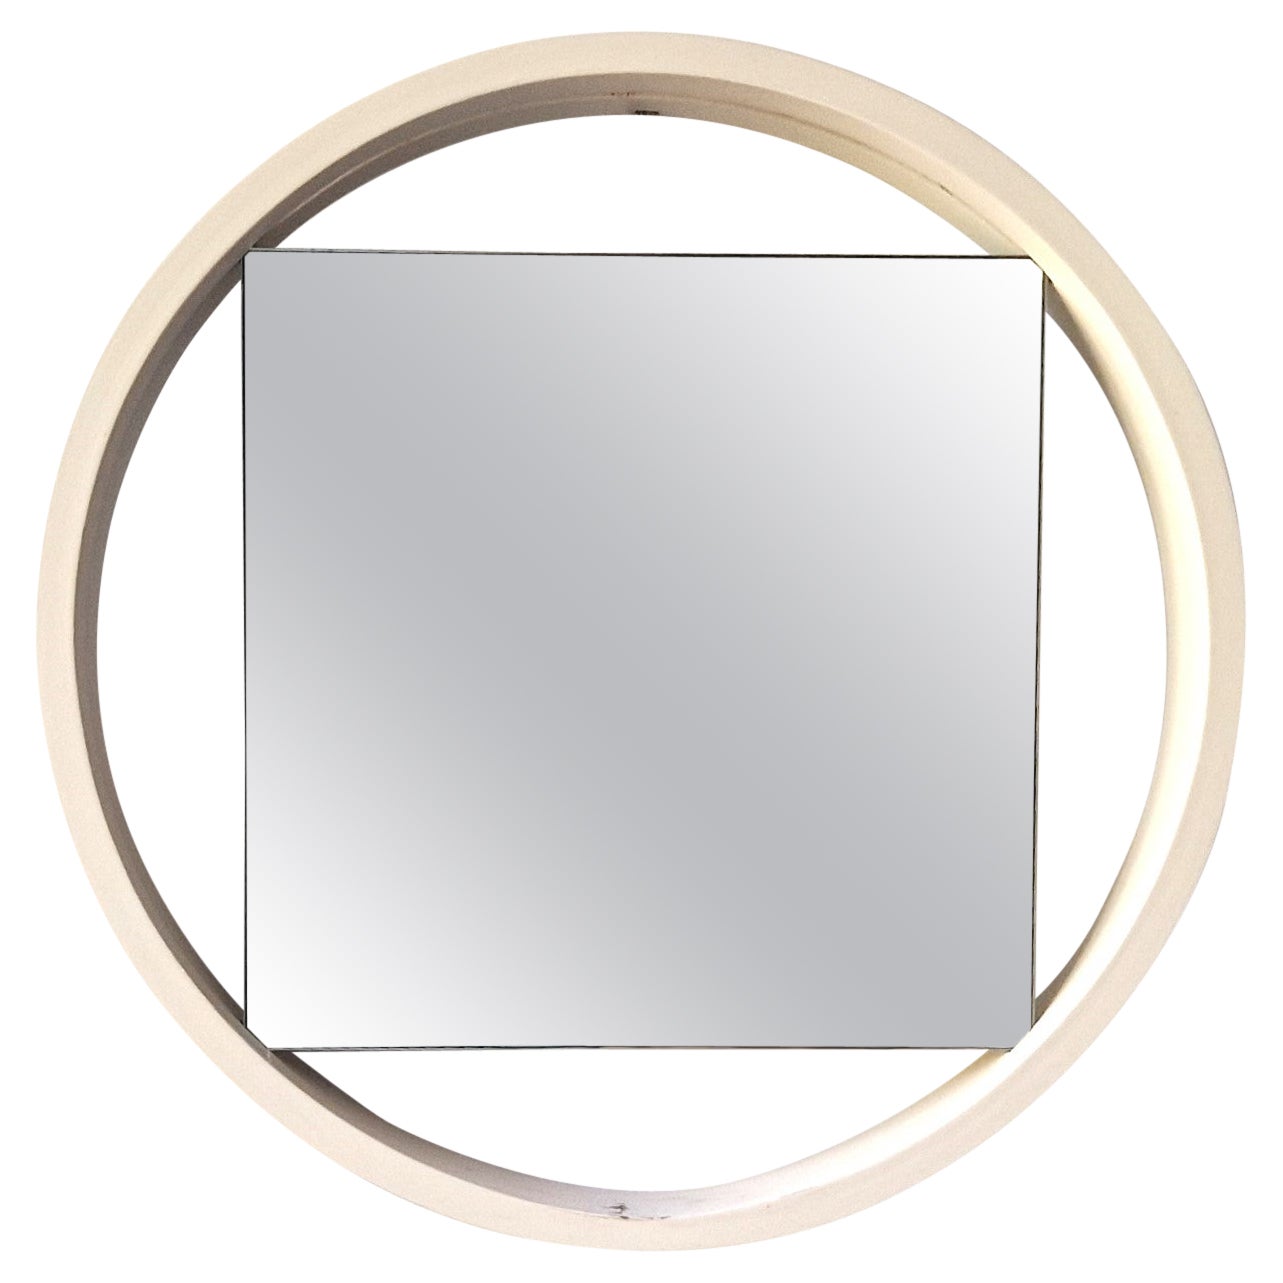 White ‘DZ84’ mirror by Benno Premsela for ‘t Spectrum, The Netherlands 1950's For Sale